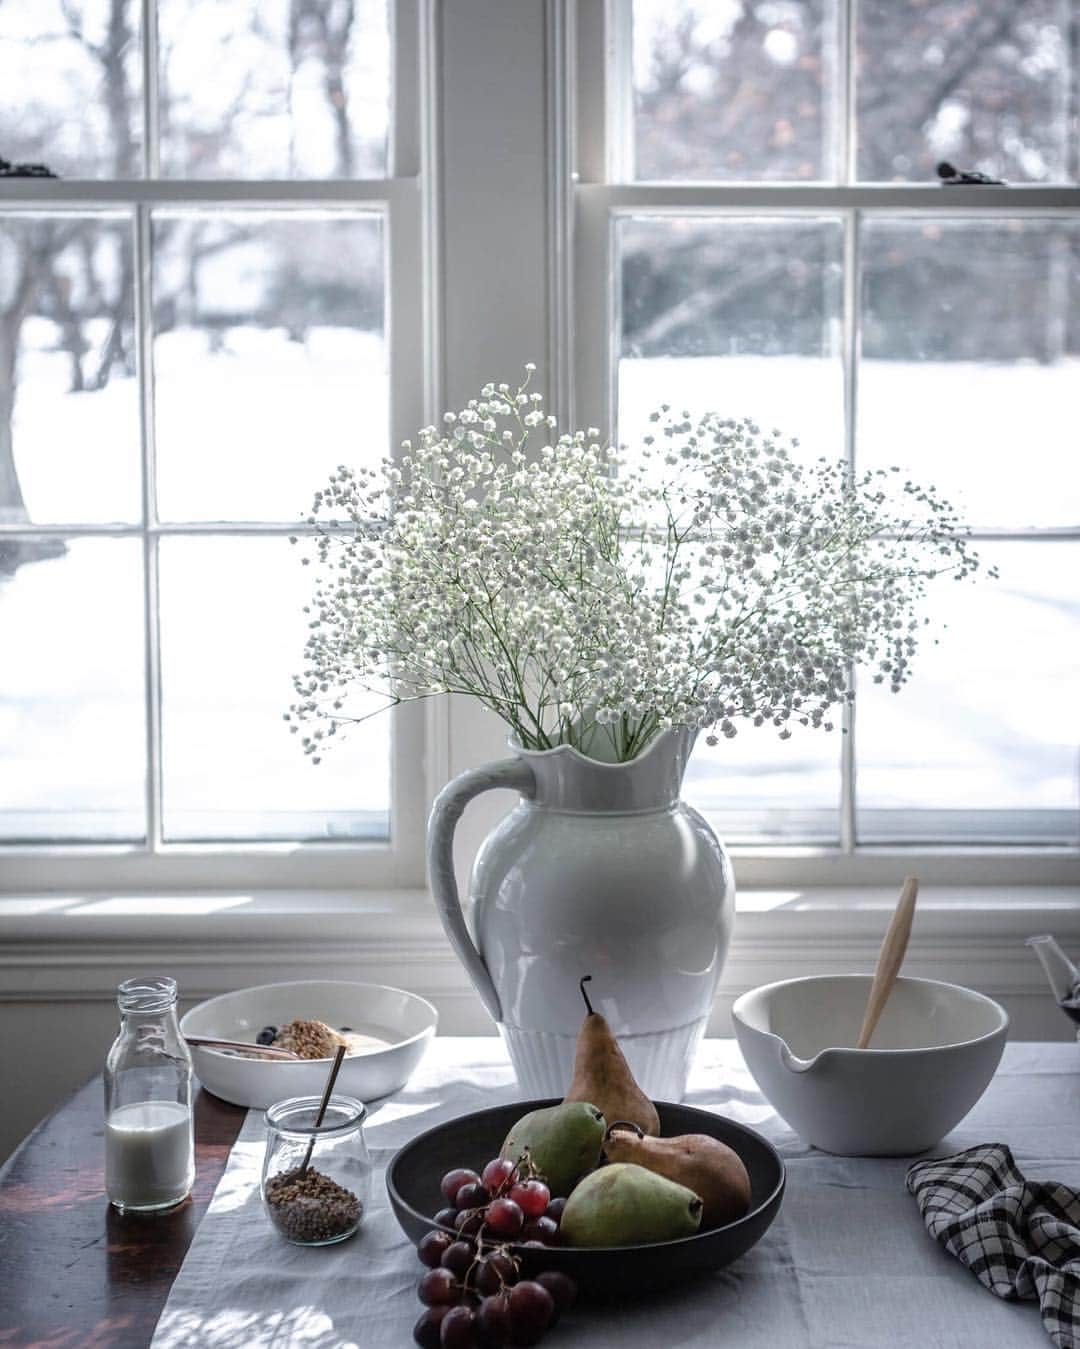 Krissyのインスタグラム：「Quiet mornings and the most beautiful winter light . A few years ago on a trip through Germany and Scandinavia I kept coming across huge bundles of gypsophila - casually plunked into vases and pots and buckets on tables, on cafe counters, in hotel rooms - I loved this reinterpretation of something I had previously overlooked / dismissed . And now, when I see it I am reminded of this wonderful trip and I often gather up a few bundles of it to bring home and plunk in a pitcher on my table. Especially loving it this winter as it looks like a million little snowflakes brought indoors . . . . . #exploretocreate #beinspired #momentslikethese #gatheringslikethese #thatsdarling#fellowmag#thehappynow #hellospring #simplejoys #eleganceintheeveryday #chasinglight #habitandhome #provinciallife #flowerstagram #myhousebeautiful #vscoflowers #blooms #embracingtheseasons #seasonspoetry #seekinspirecreate #myeverydaymagic #livemoremagic #aseasonalshift #quietinthewild #thatauthenticfeeling #alliseeispretty #poetryofsimplethings #verilymoment」